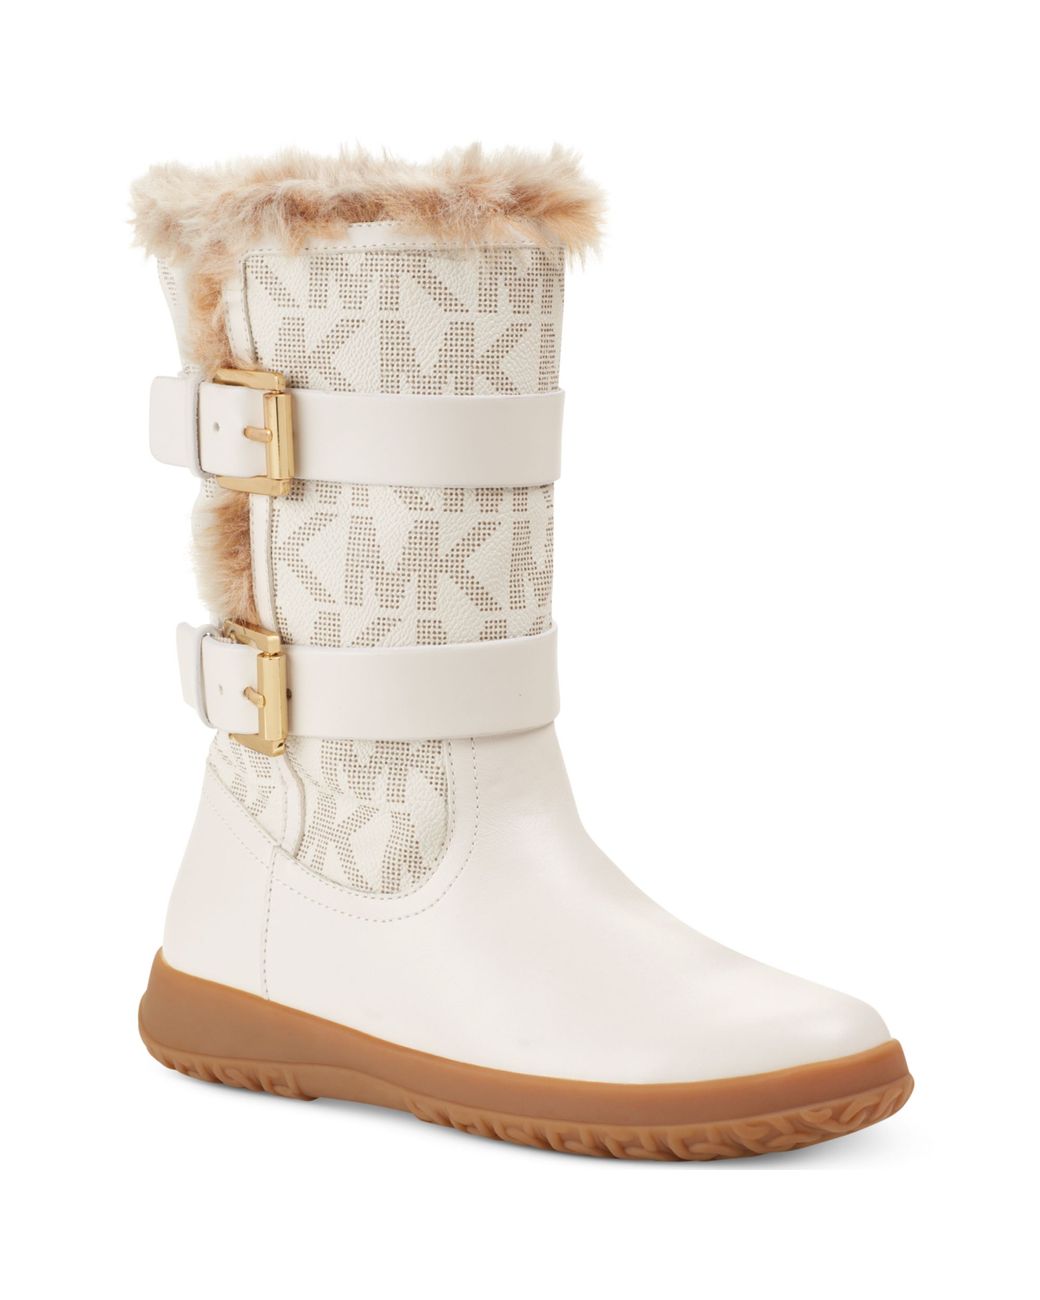 Michael Kors Aaran Cold Weather Faux-Fur Boots in White | Lyst